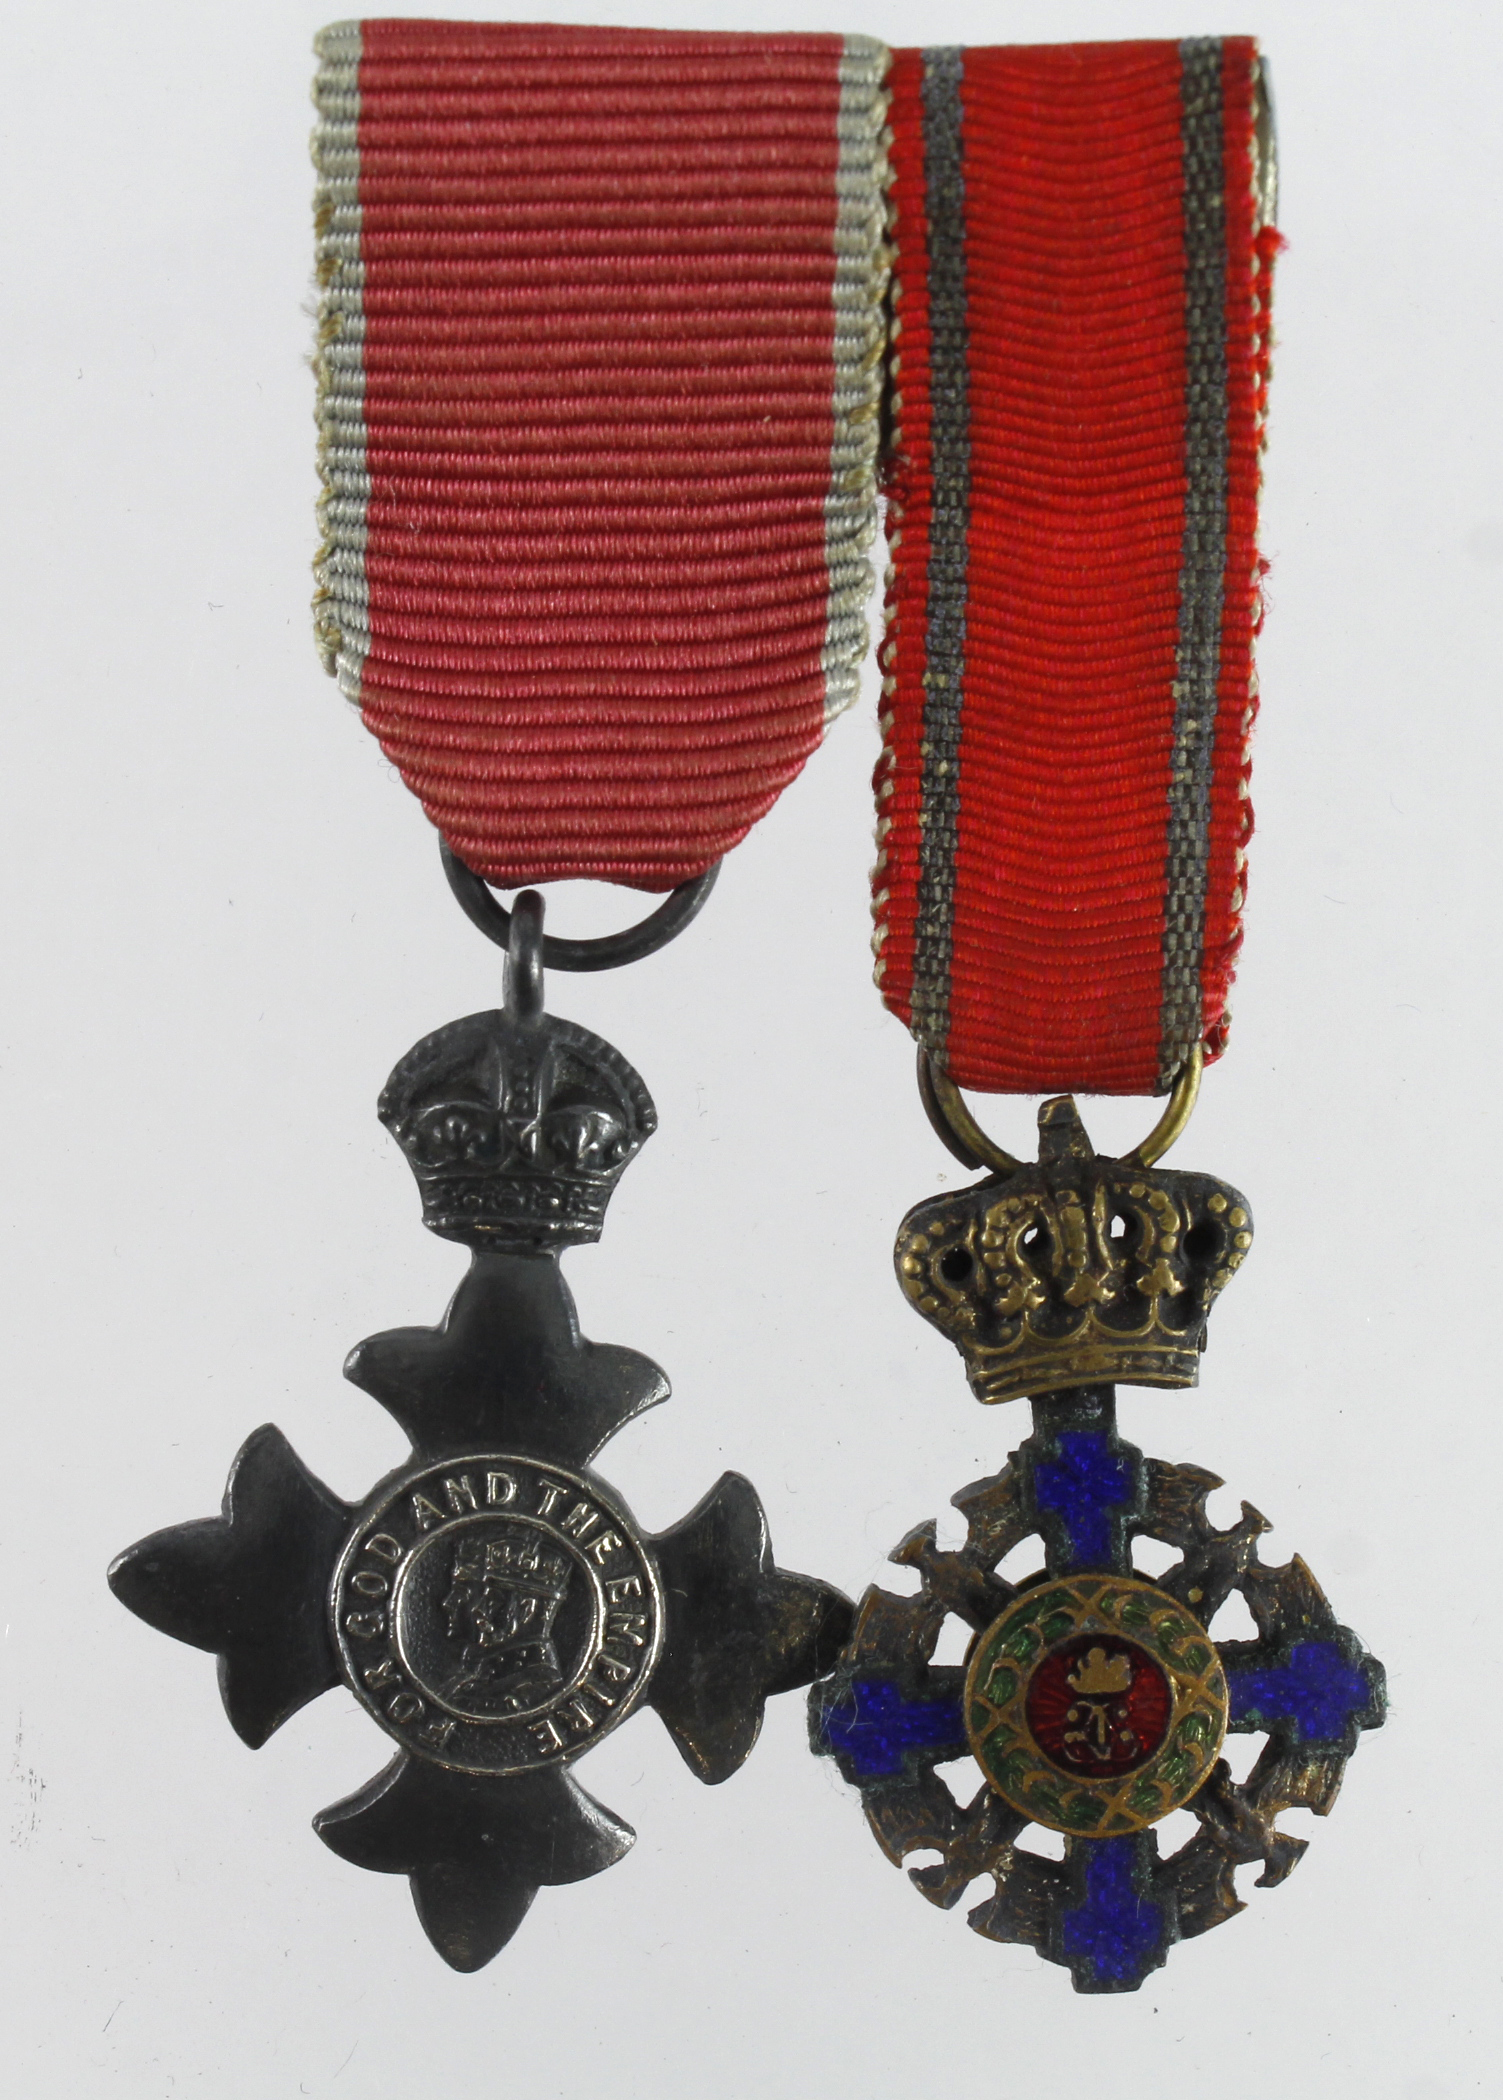 Minature Medal group mounted as worn - OBE (Civil) and Order of Commander of Romanian Star WW2